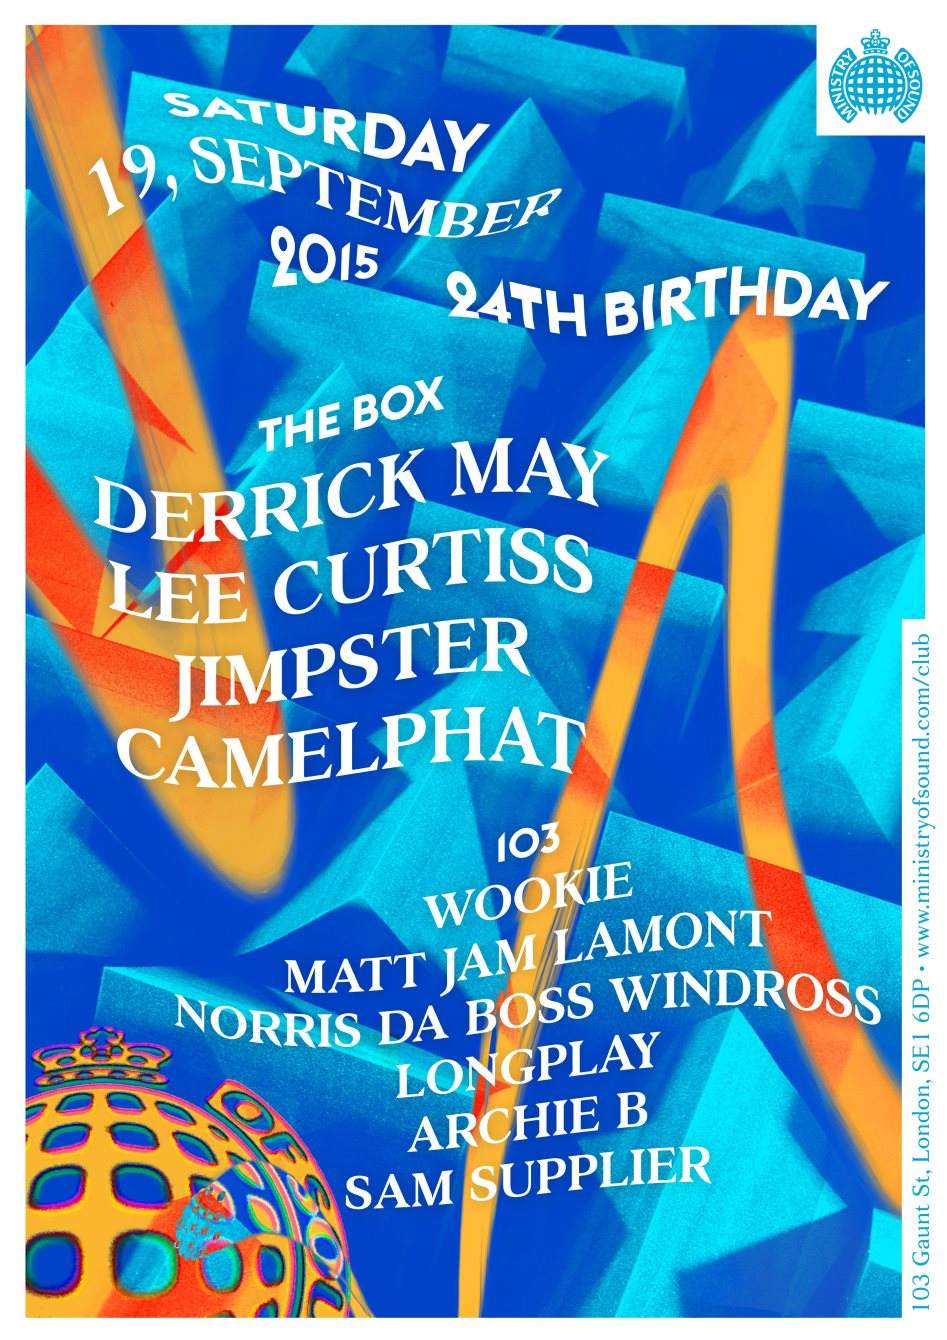 24th Birthday: Derrick May, Lee Curtiss, Jimpster and Camelphat - Página frontal